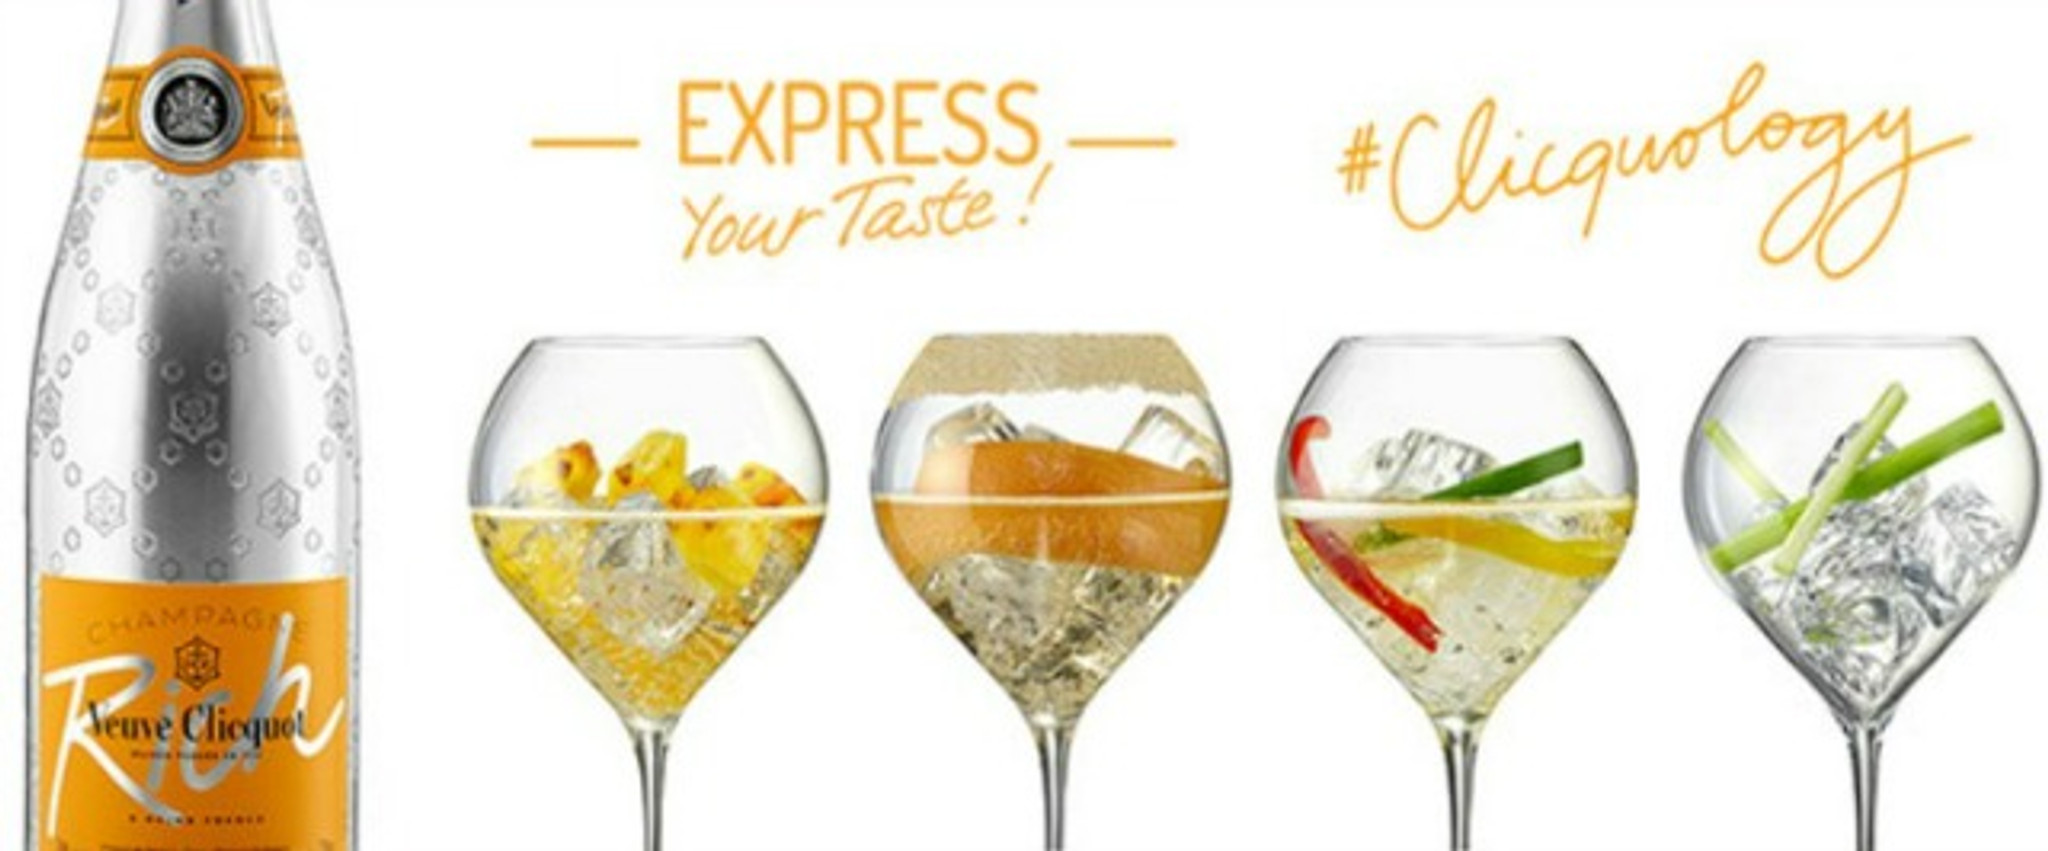 In the NOW: Veuve Clicquot Rich for champagne cocktails - The